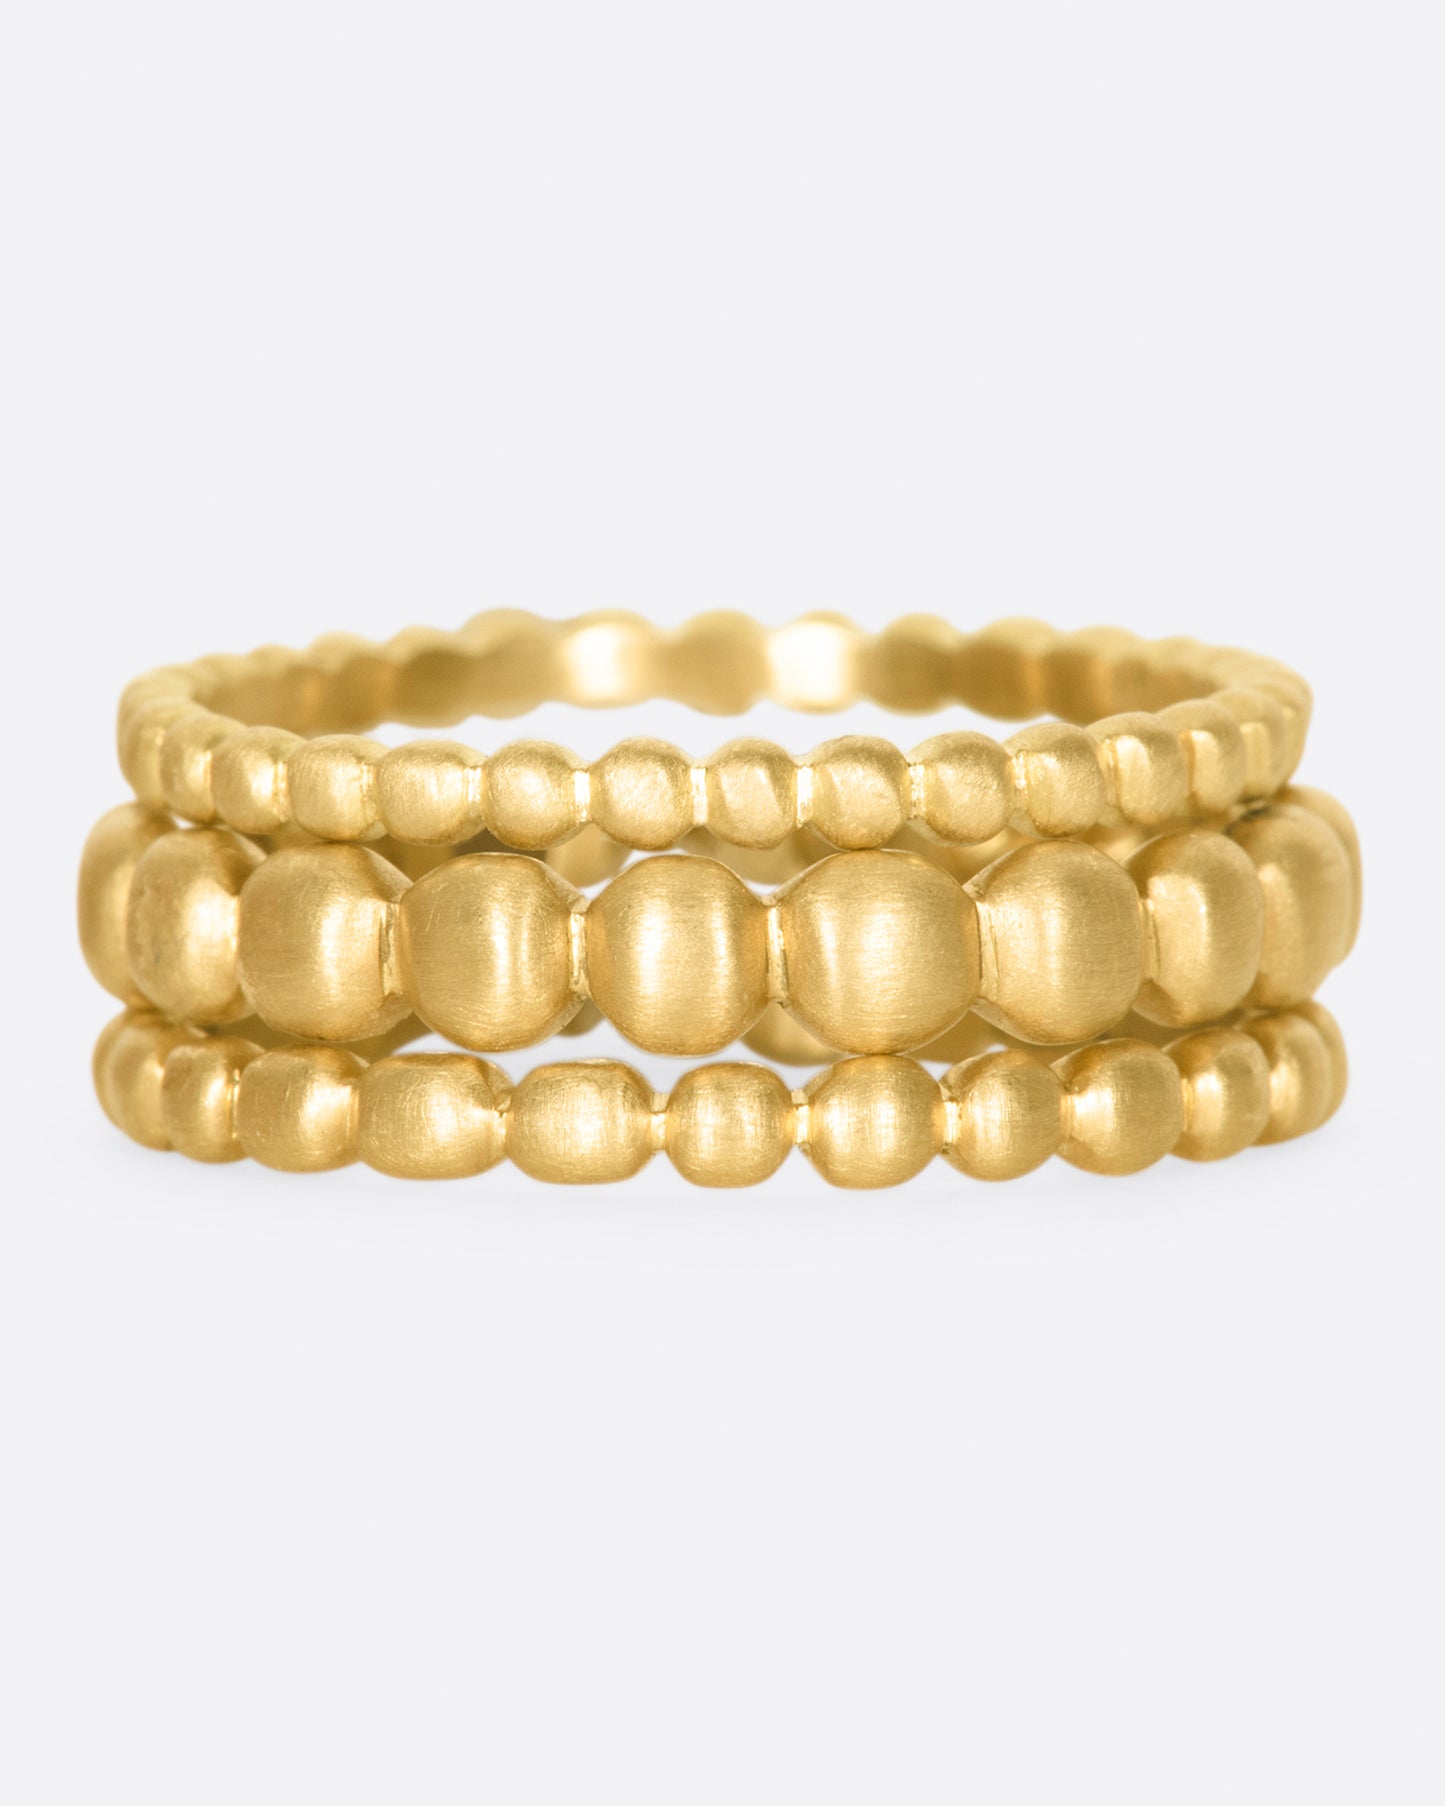 A perfect gold bubble stacking ring that adds volume and texture between your gem-heavy rings or looks great on its own. This comes in three different widths.